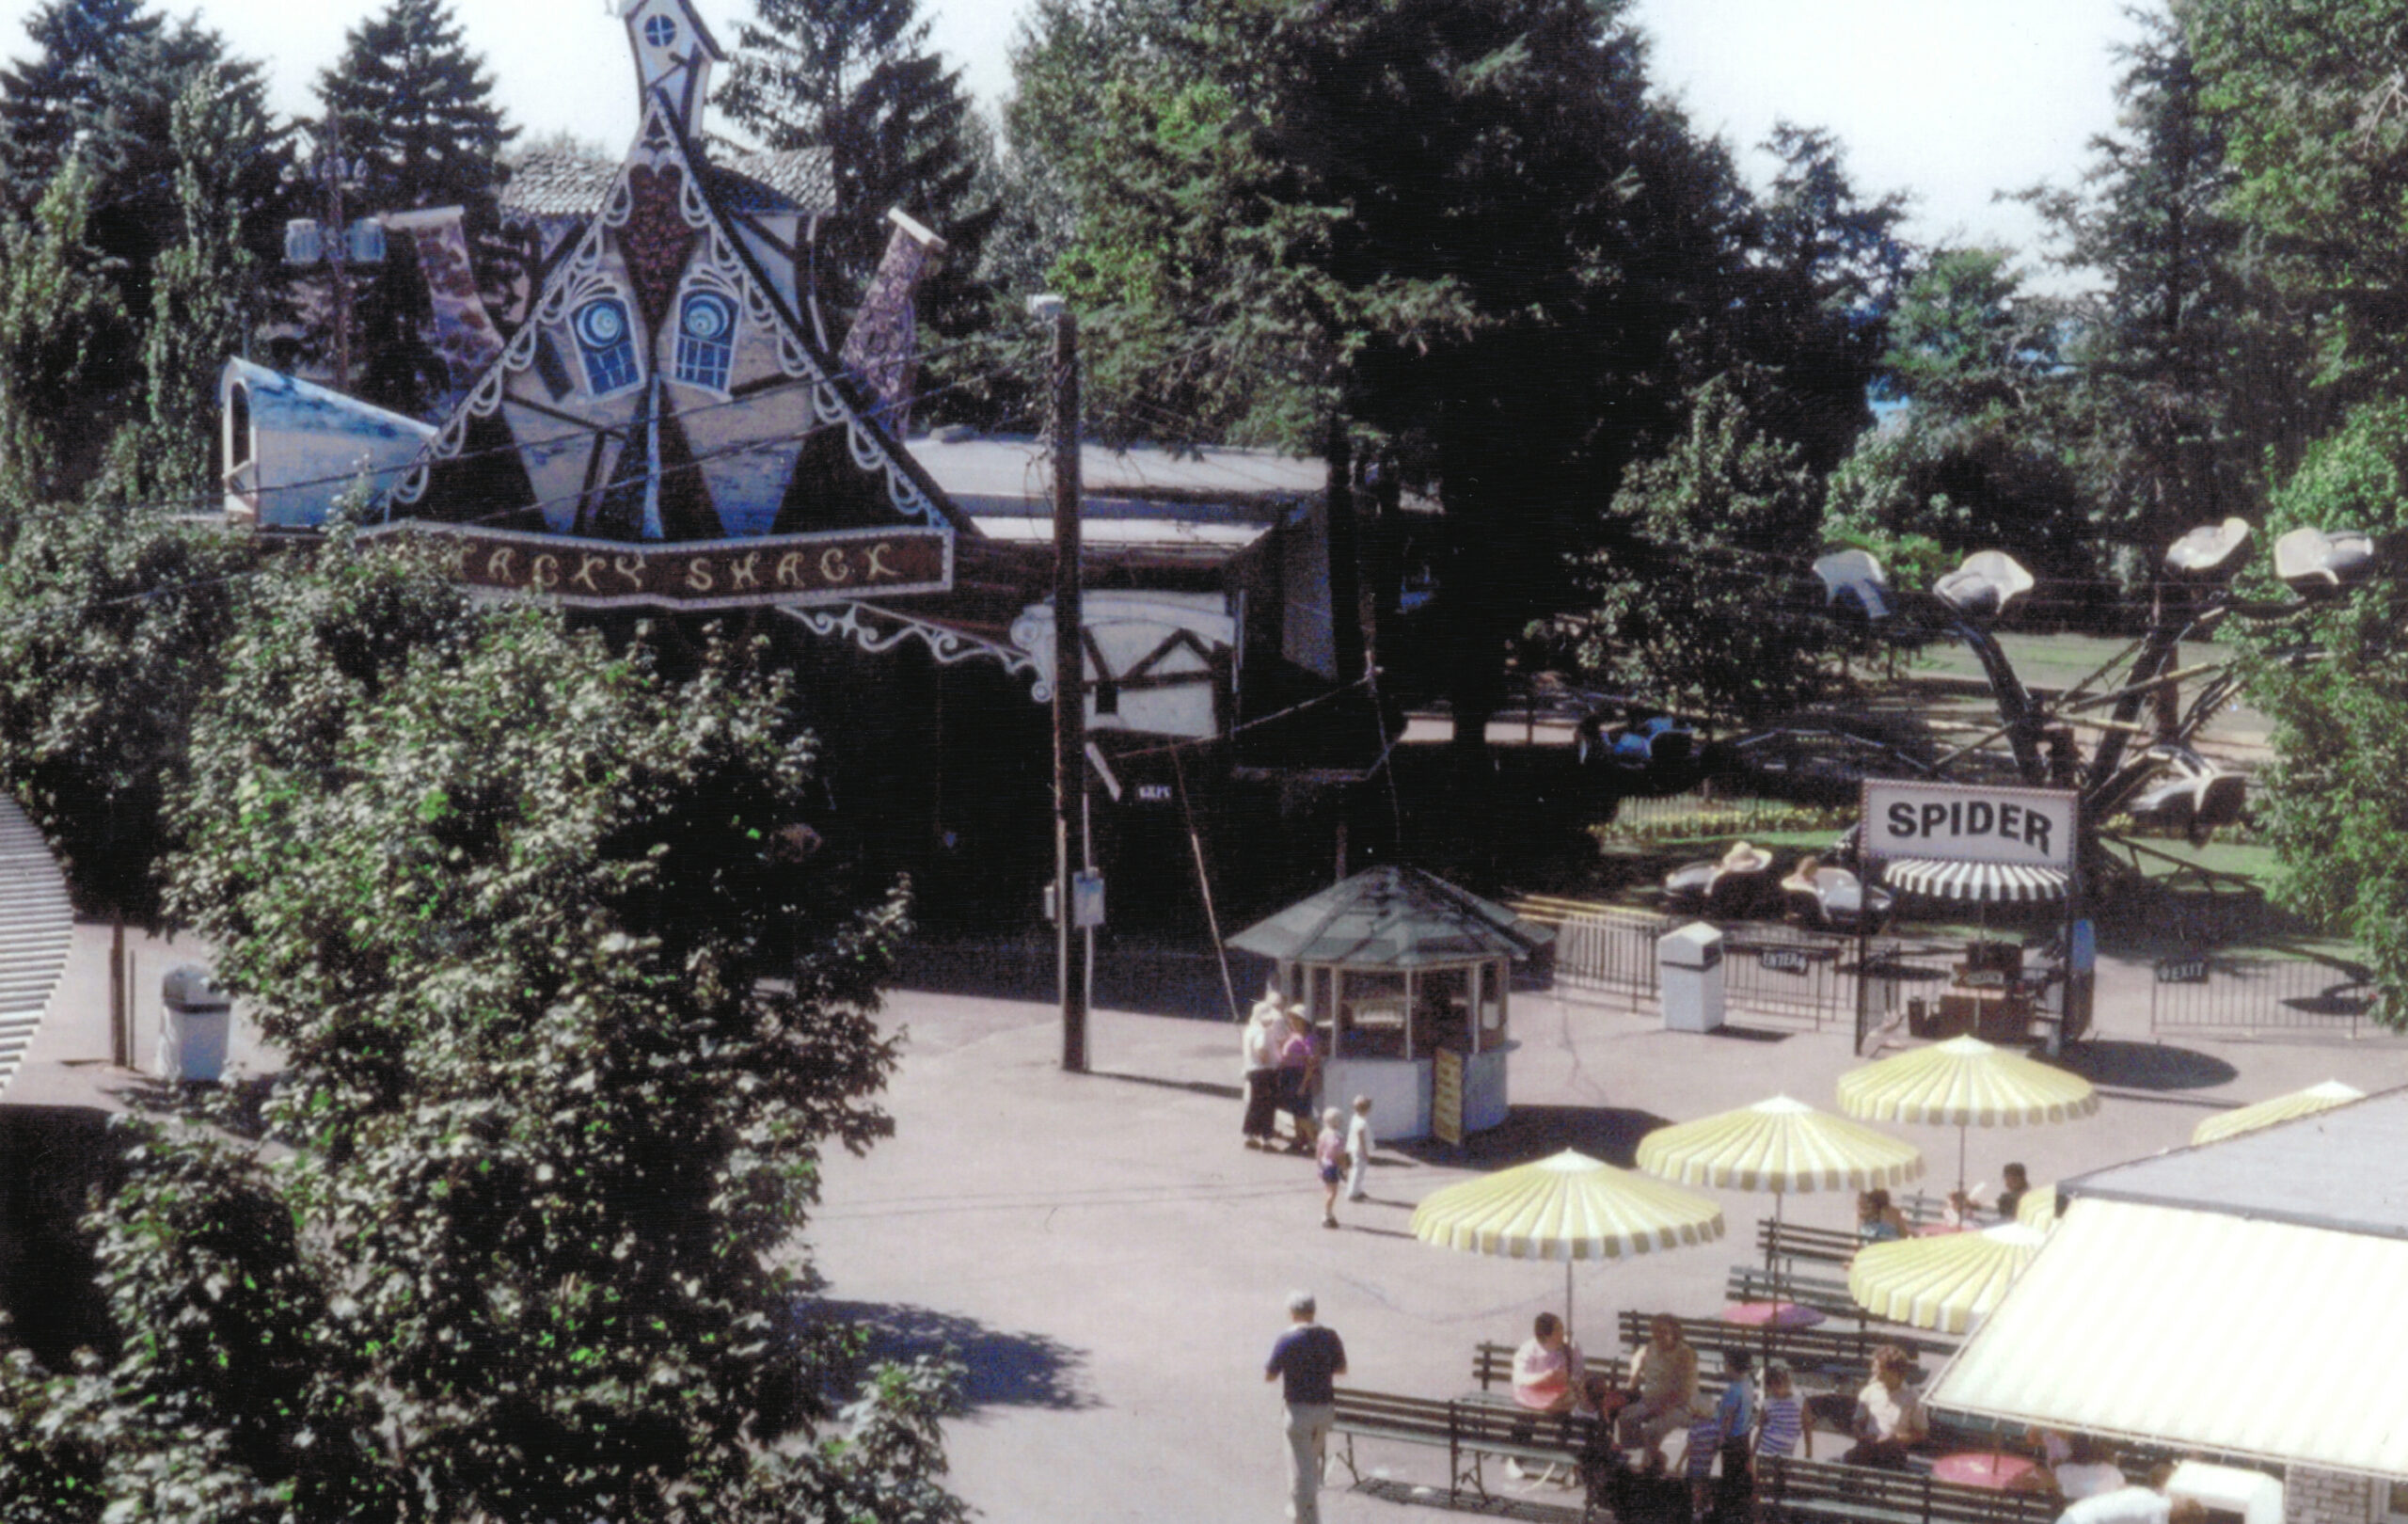 Whacky Shack and Spider rides in the late 1970s.